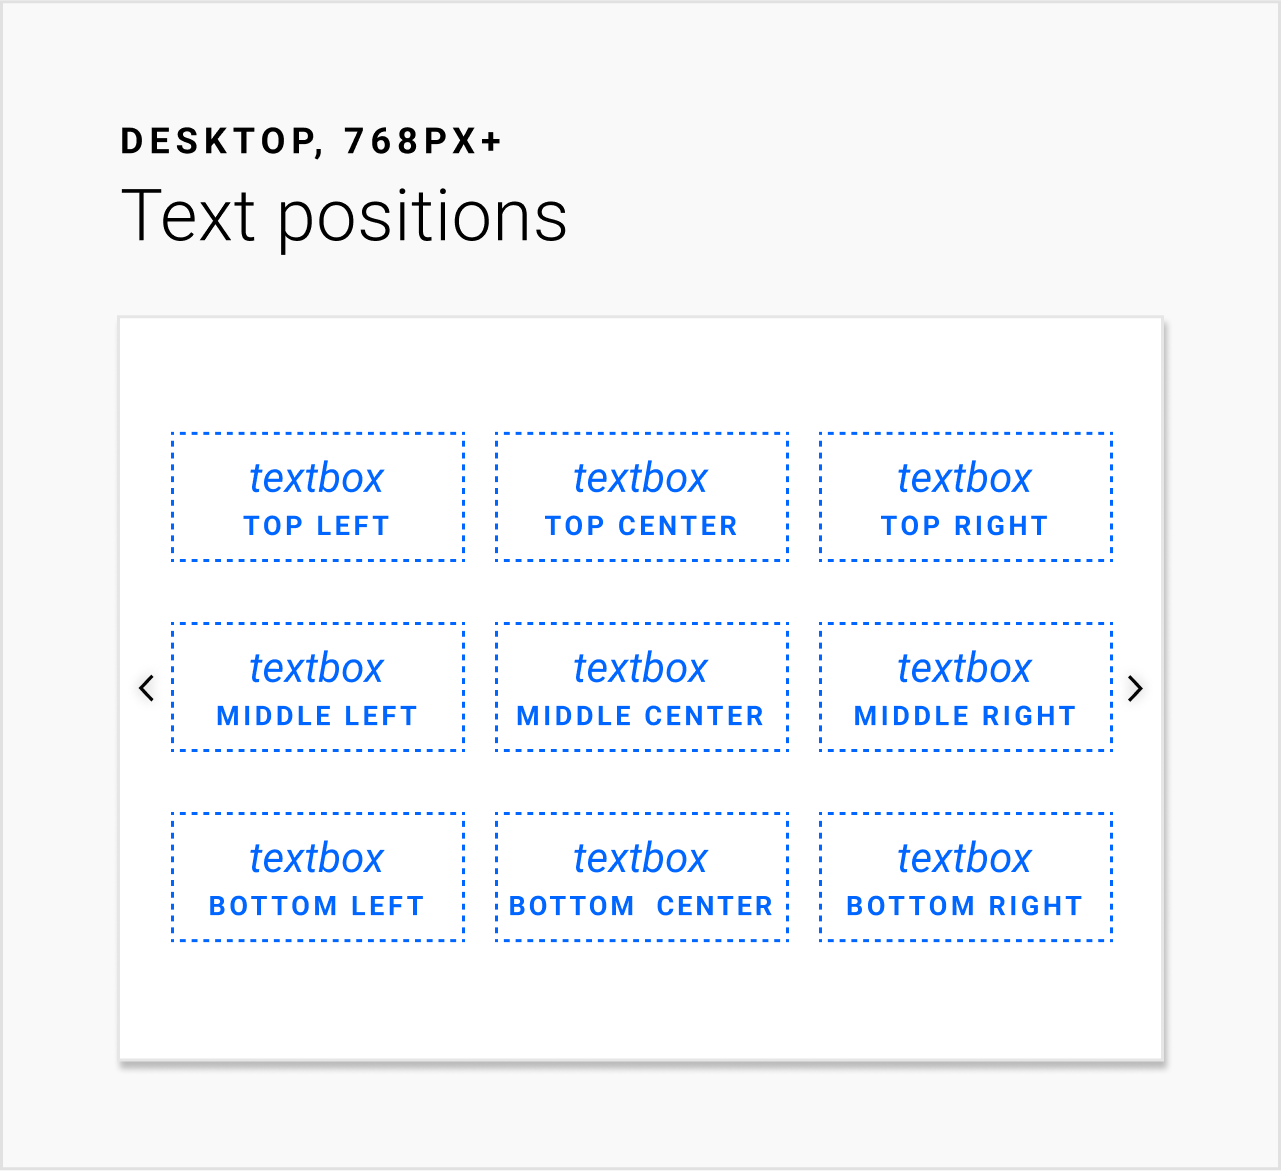 To speed up the launches of Visual Stories, we defined a set of options for the design of each page. For example, we outlined 9 core textbox options for screen widths over 768px.